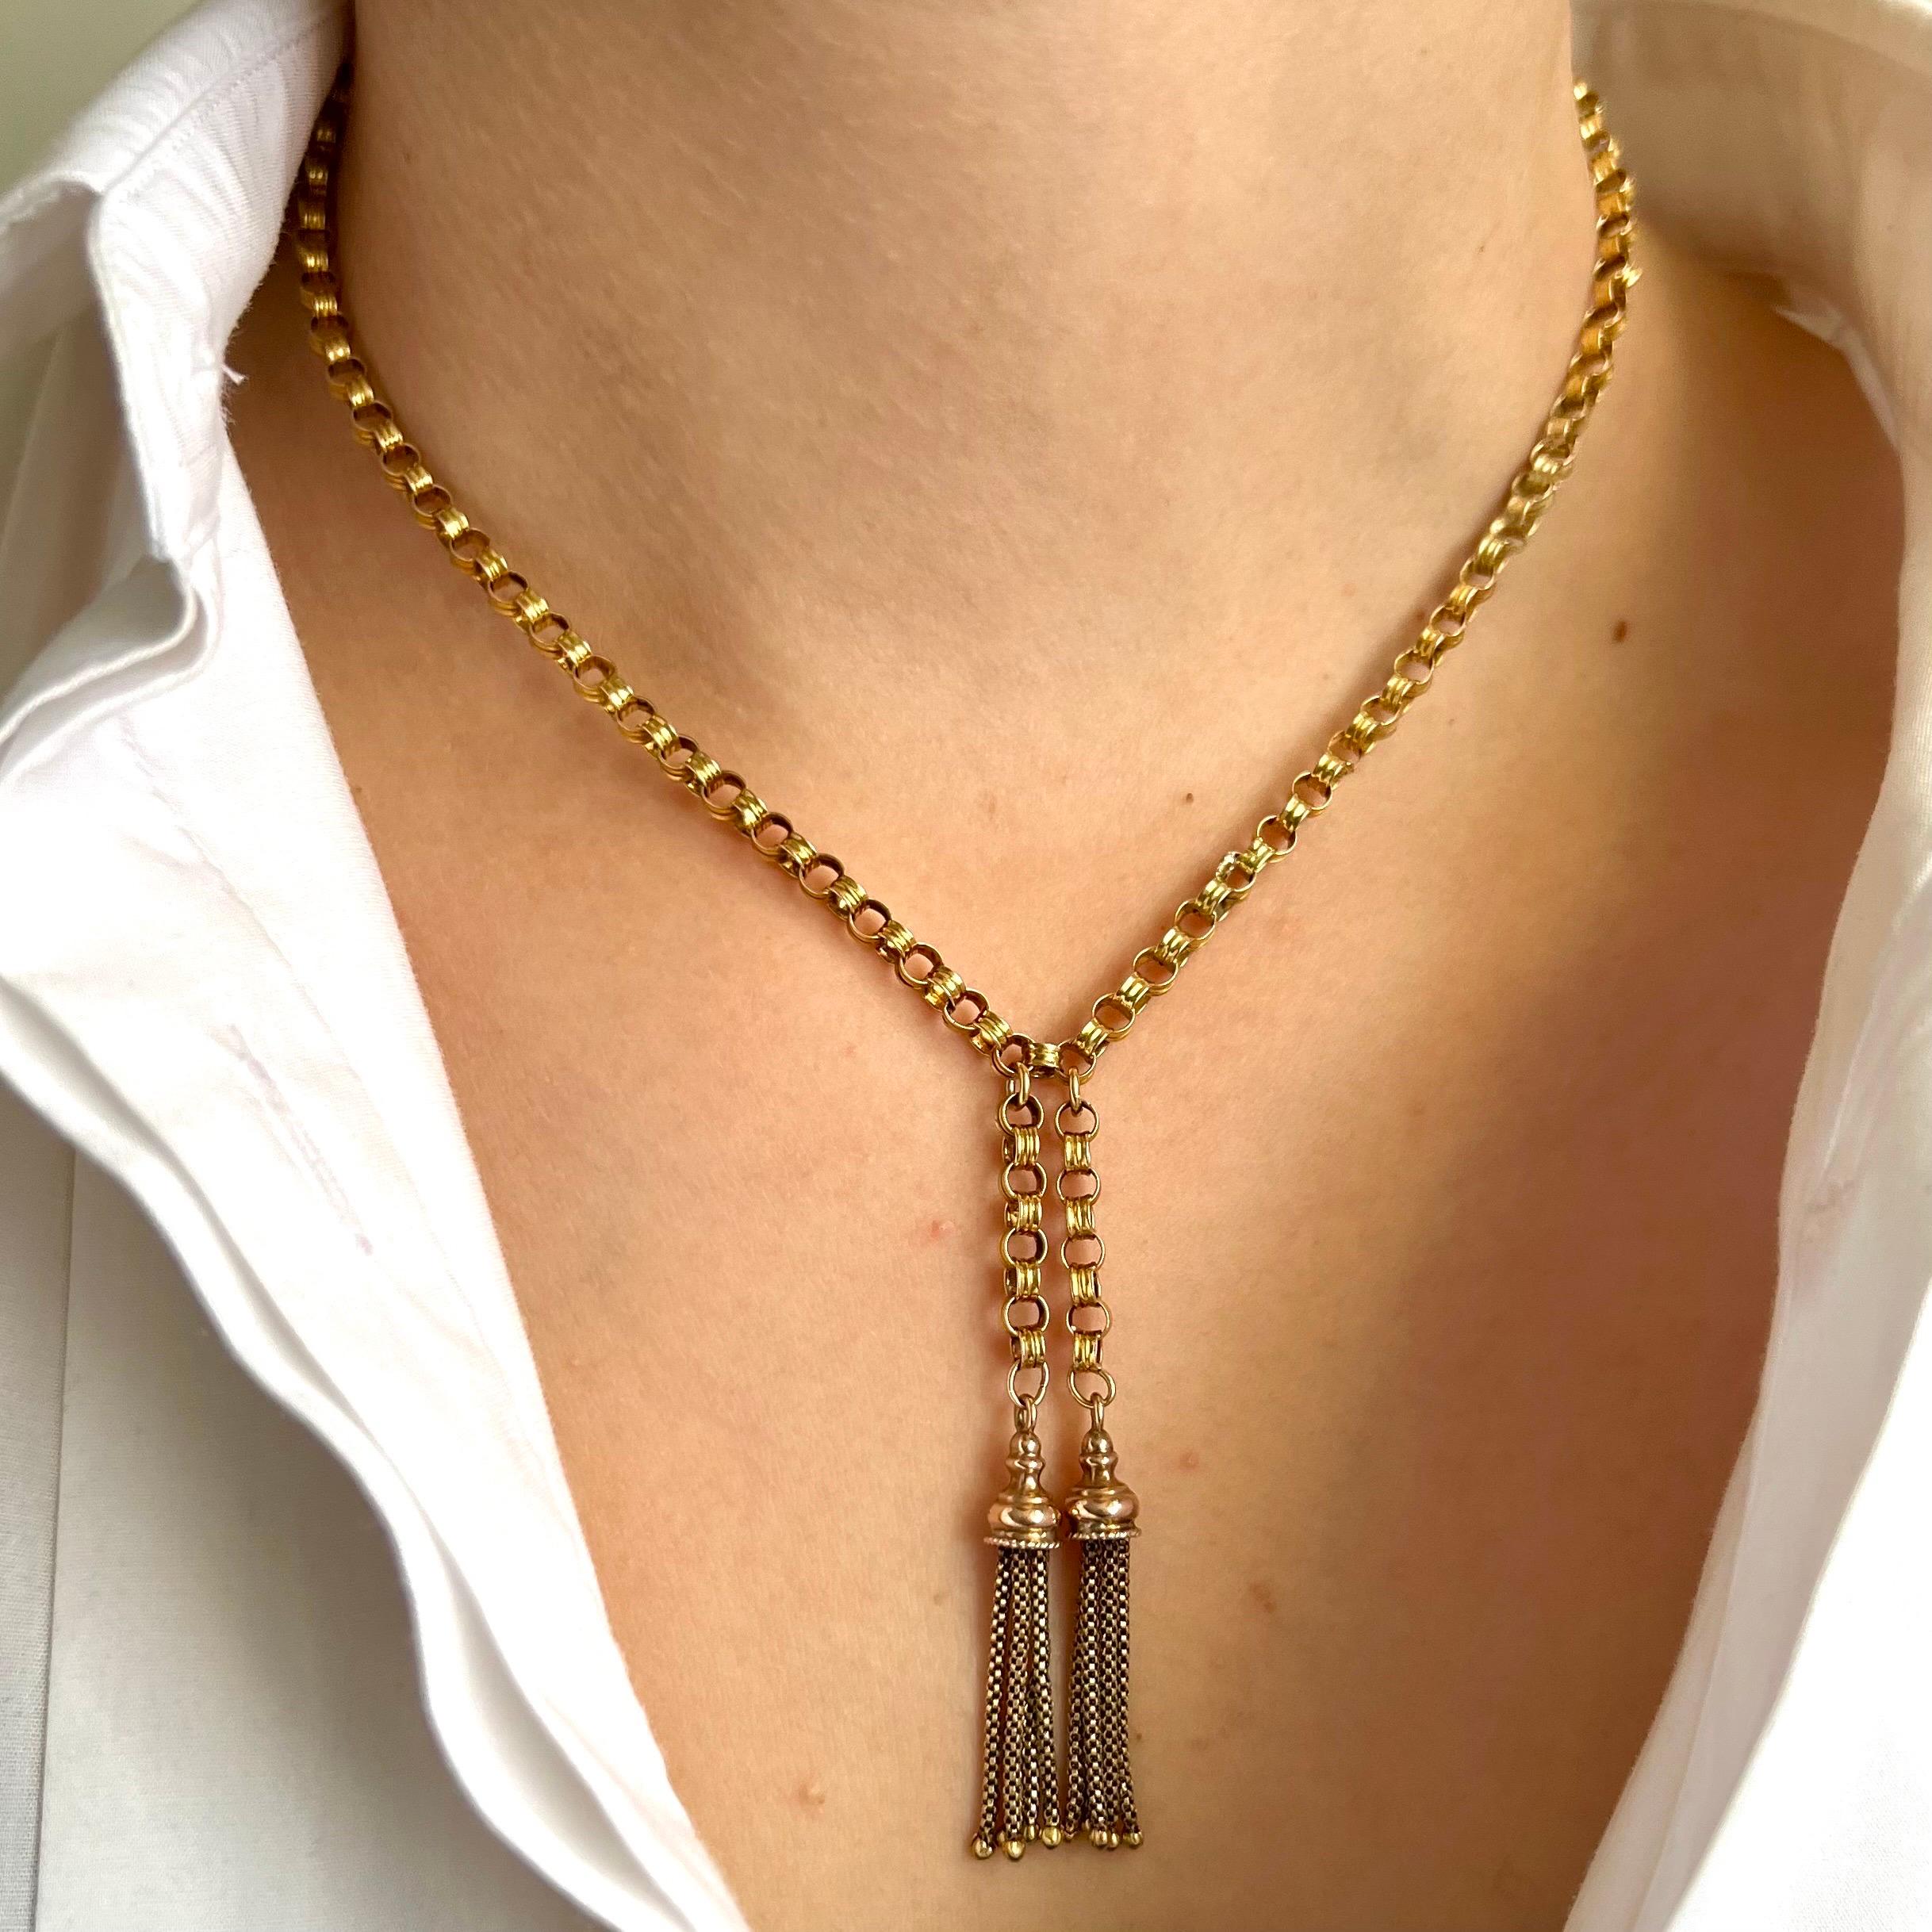 This is an antique Victorian gold link belcher chain necklace set with two dangling tassel pendants. Each round link has a polished decorative grooved link woven together into this gorgeous antique strand. The belcher chain necklace is made of 14